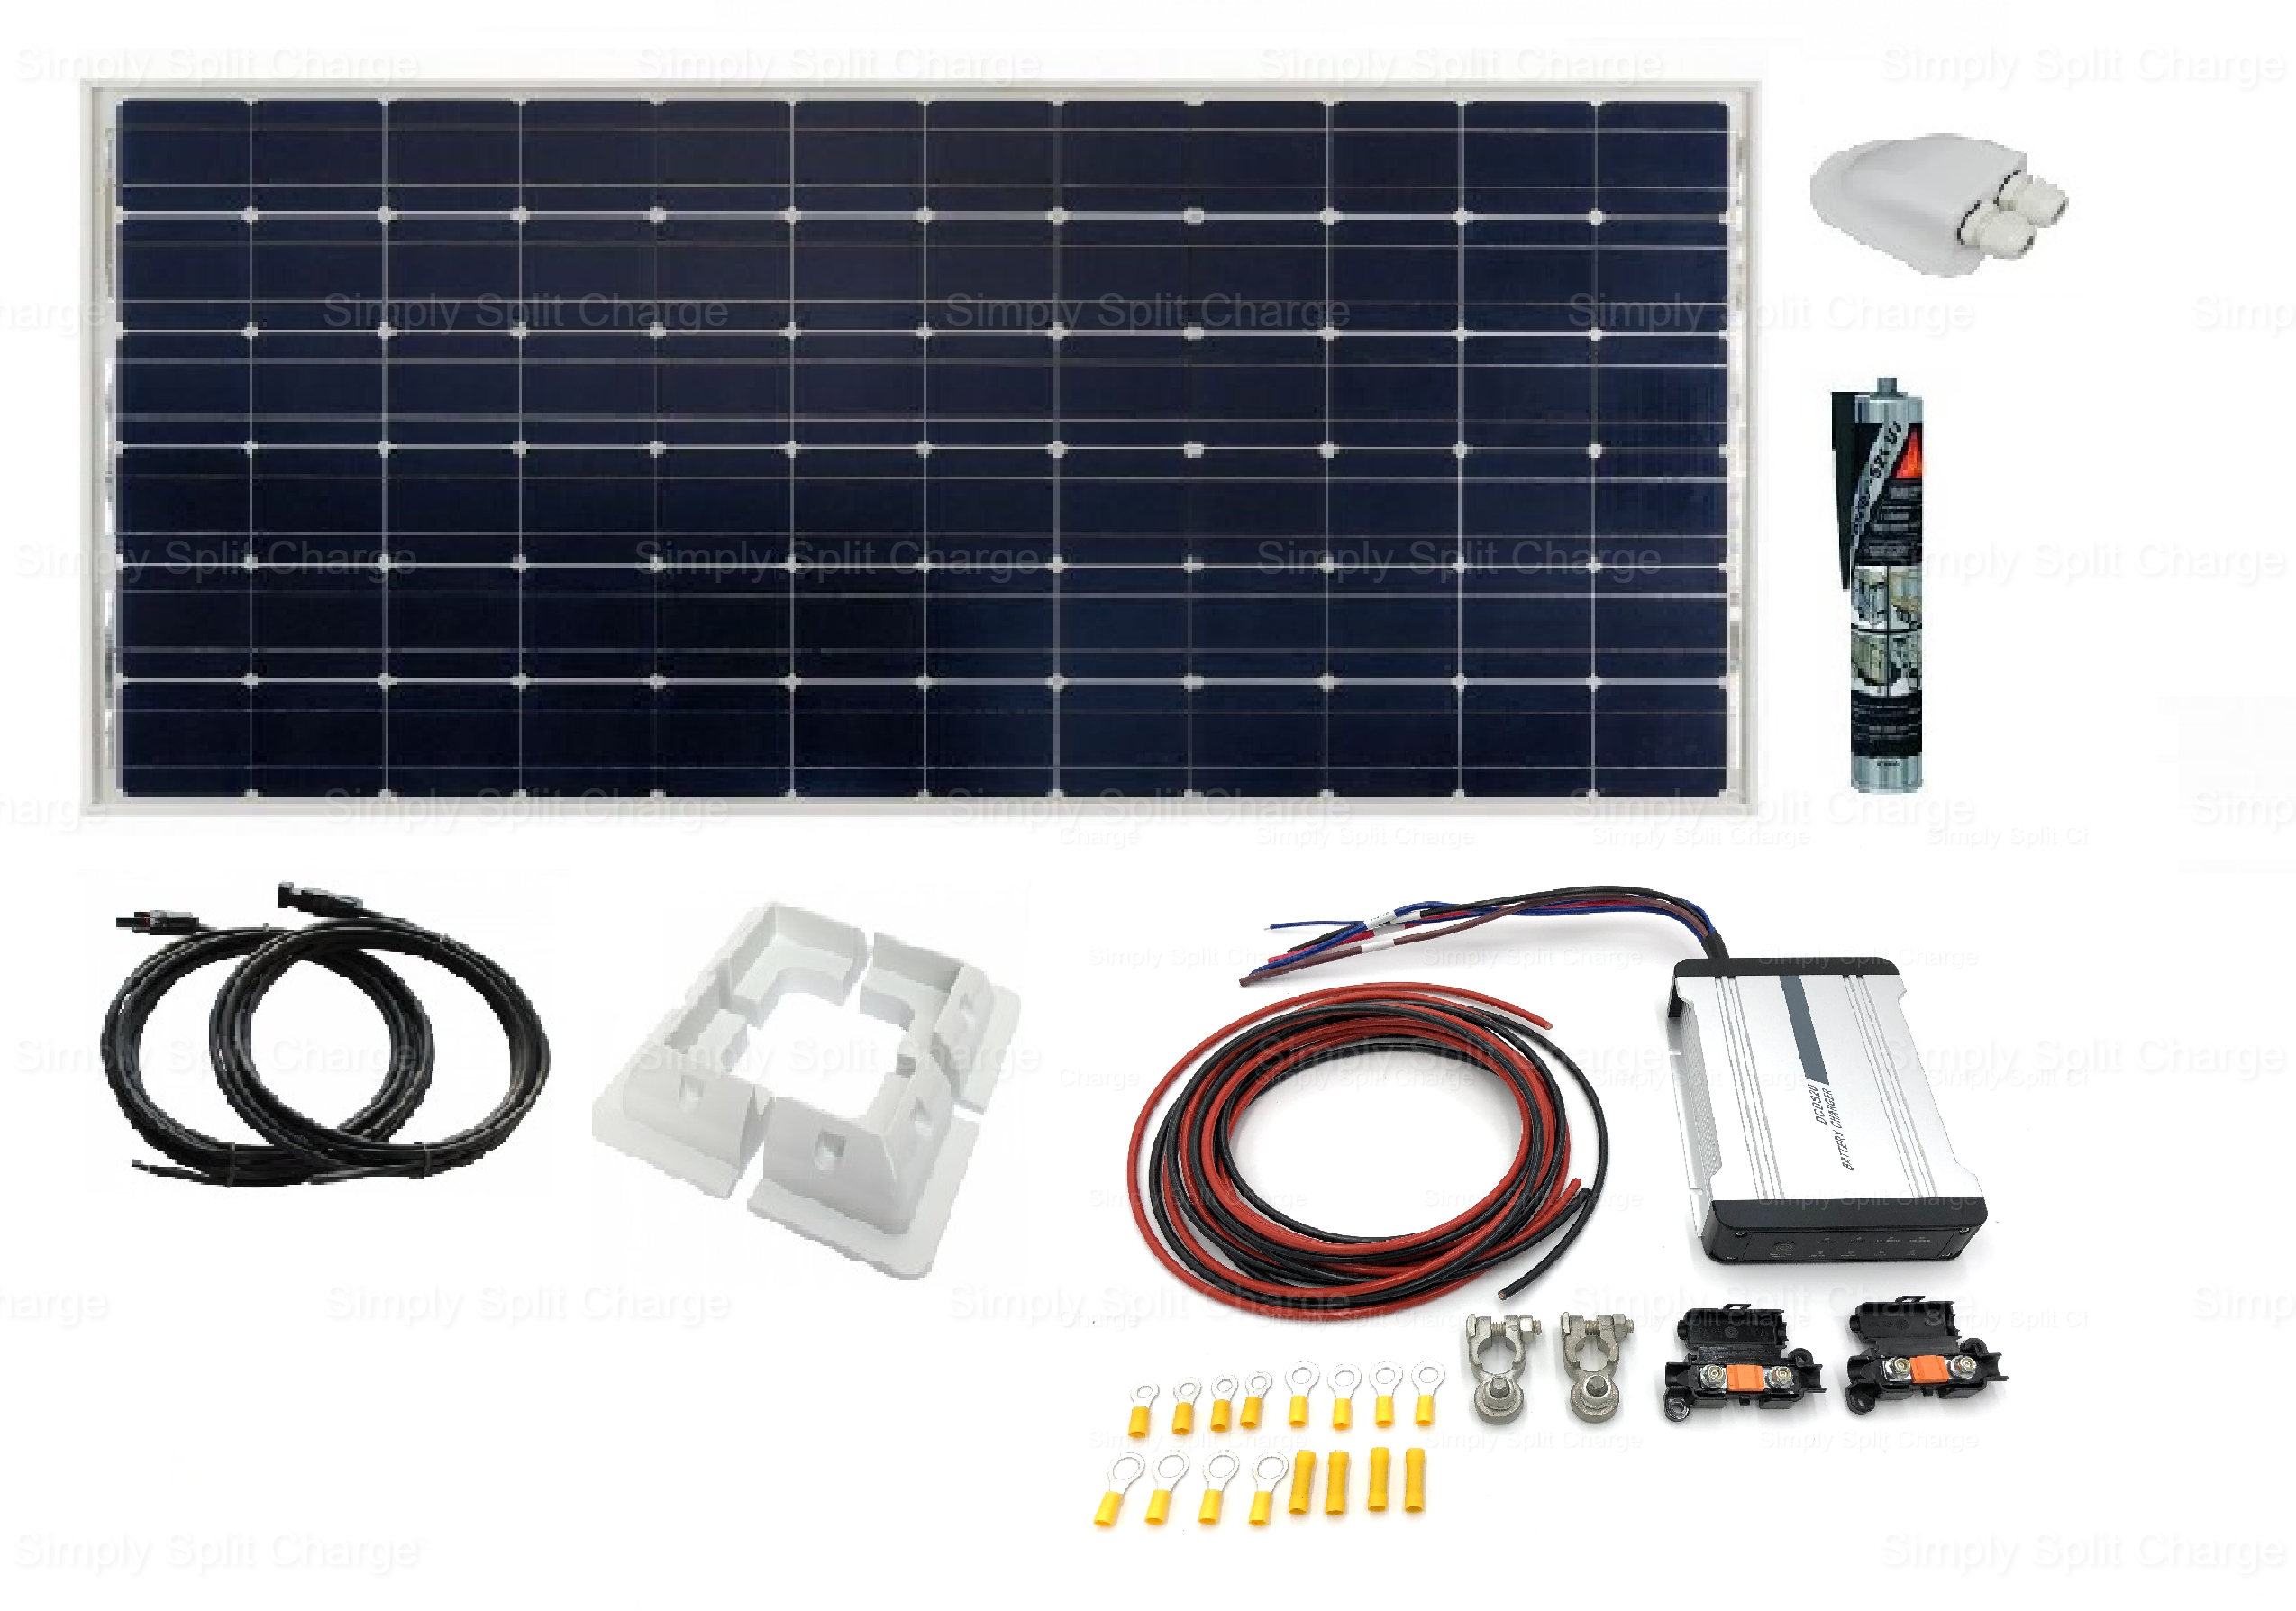 DCDS20 12v 20a B2B Charger - 115w Victron Solar Panel Kit